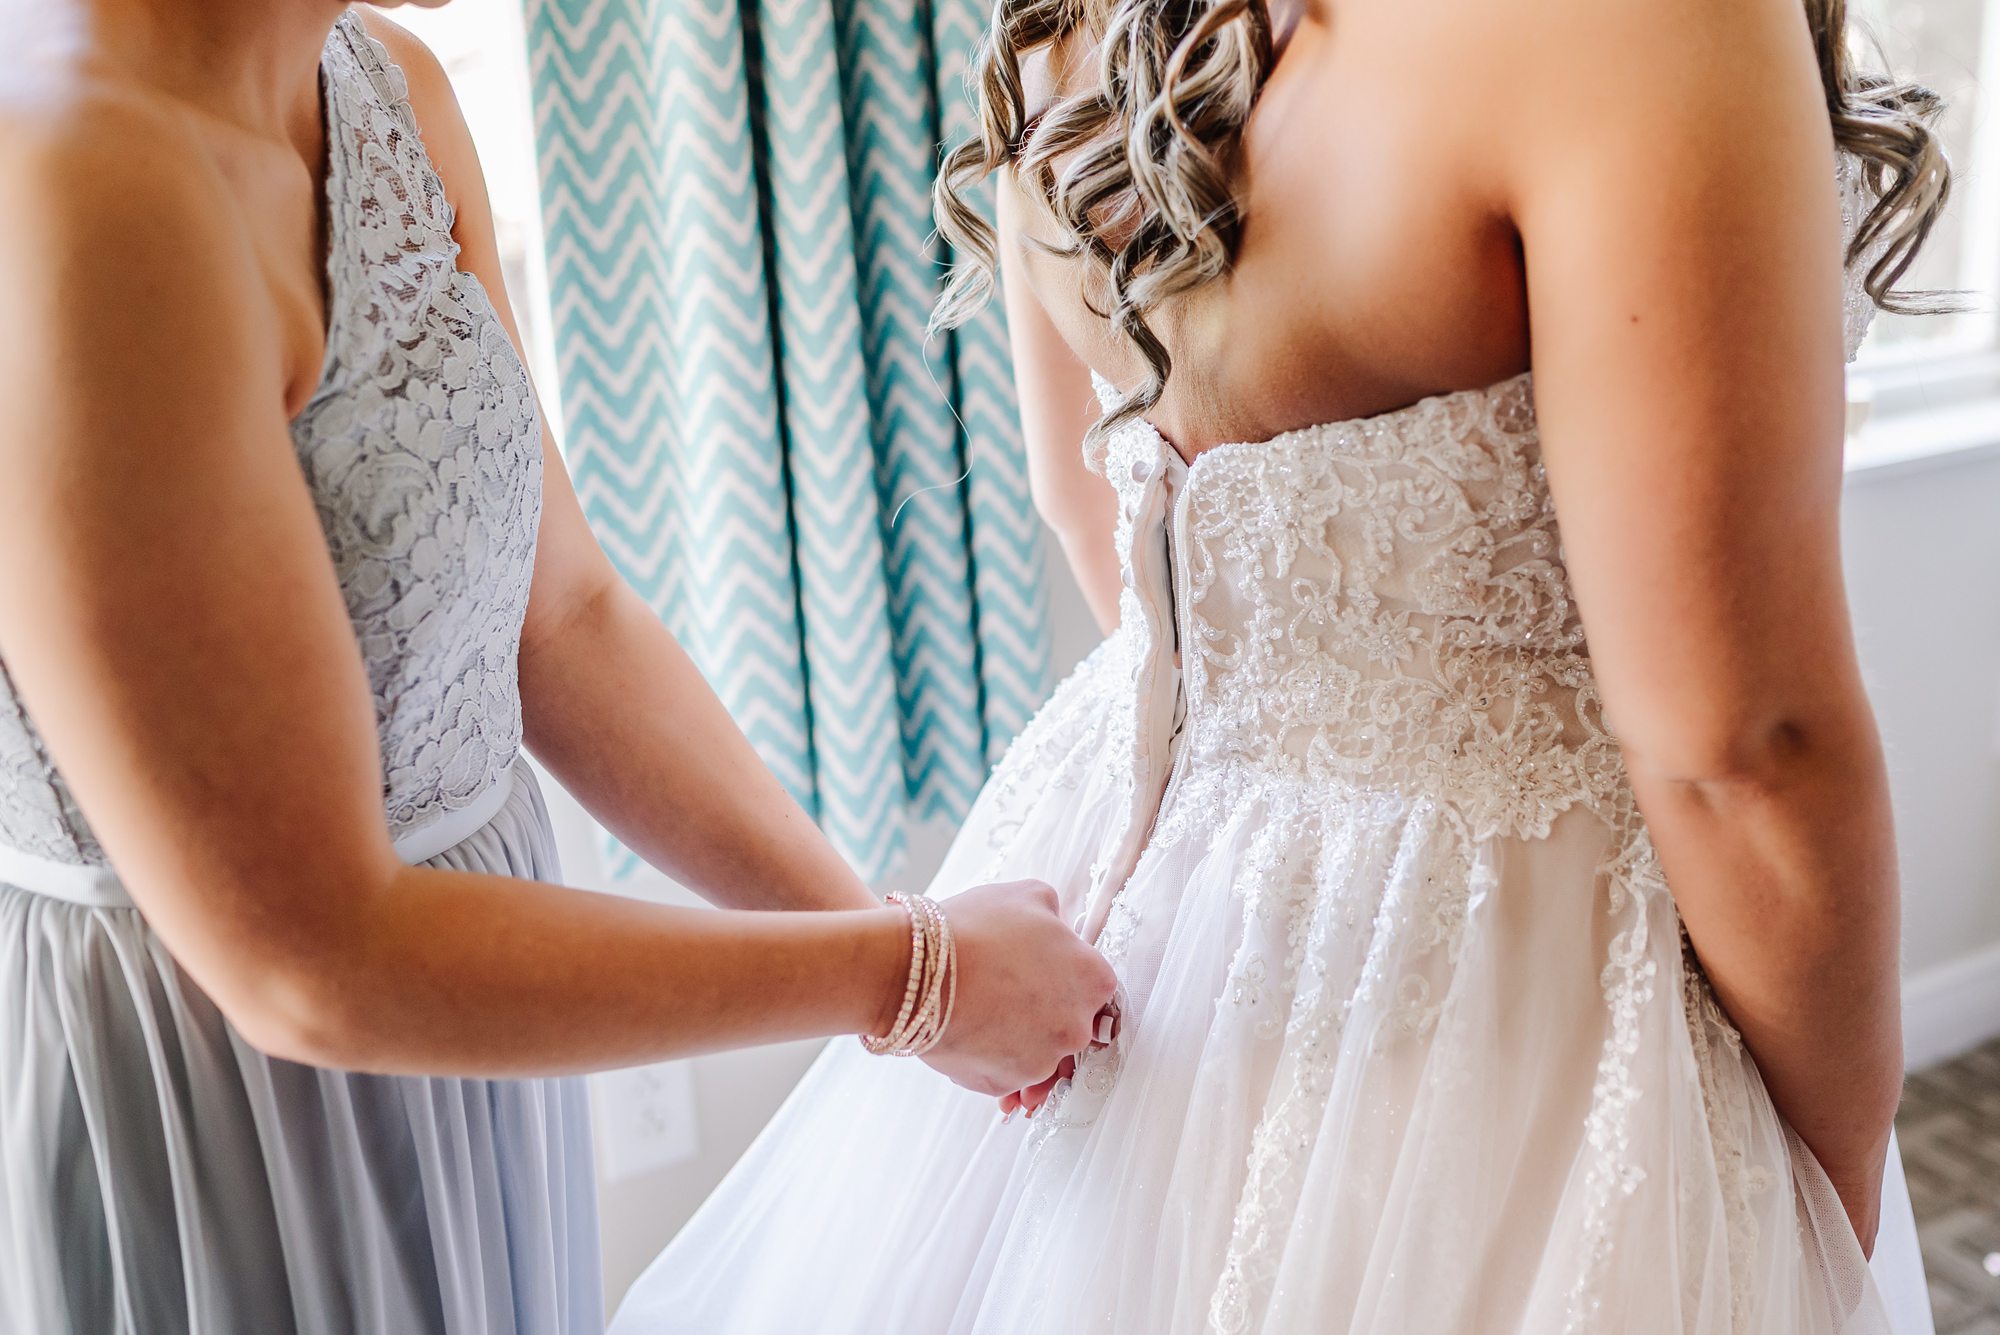 maid of honor zipping brides dress